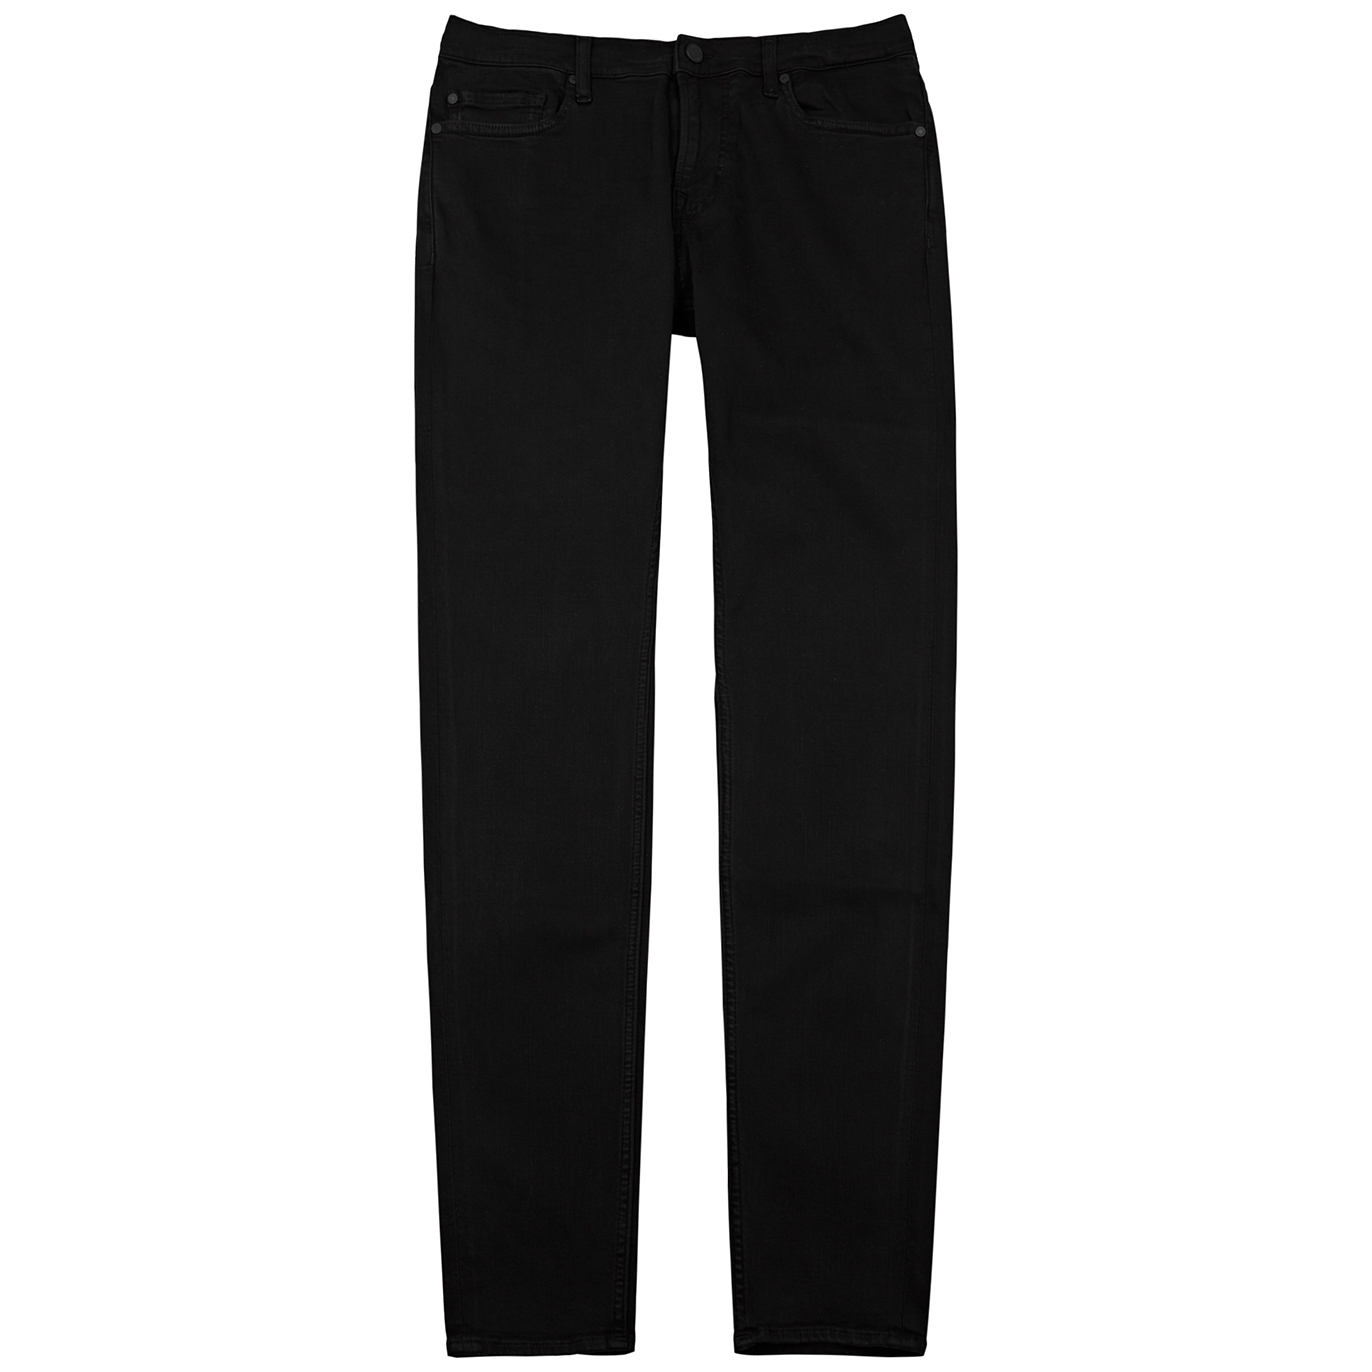 7 For All Mankind Paxtyn Luxe Performance Plus+ Black Skinny Jeans